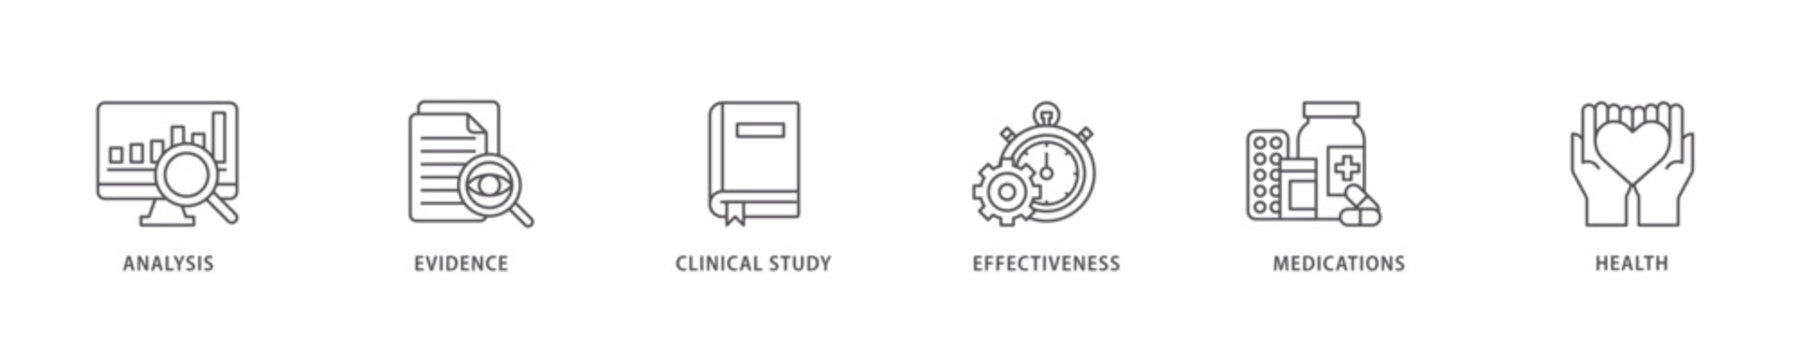 Clinical research icon set flow process which consists of analysis, evidence, clinical study, effectiveness, medications and health icon live stroke and easy to edit 